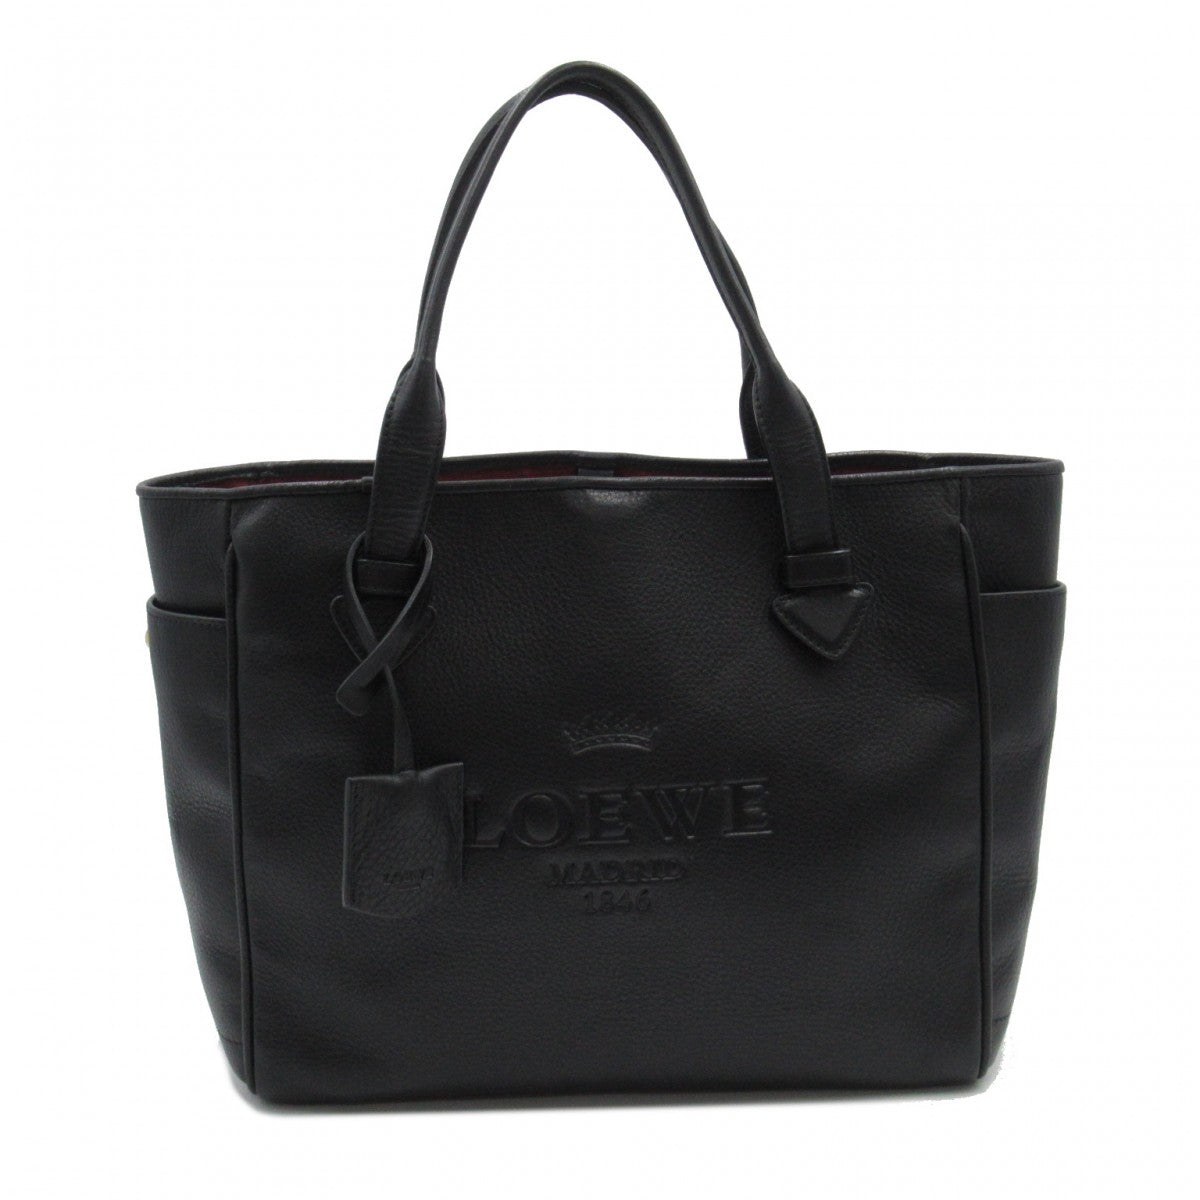 Heritage Leather Tote Bag